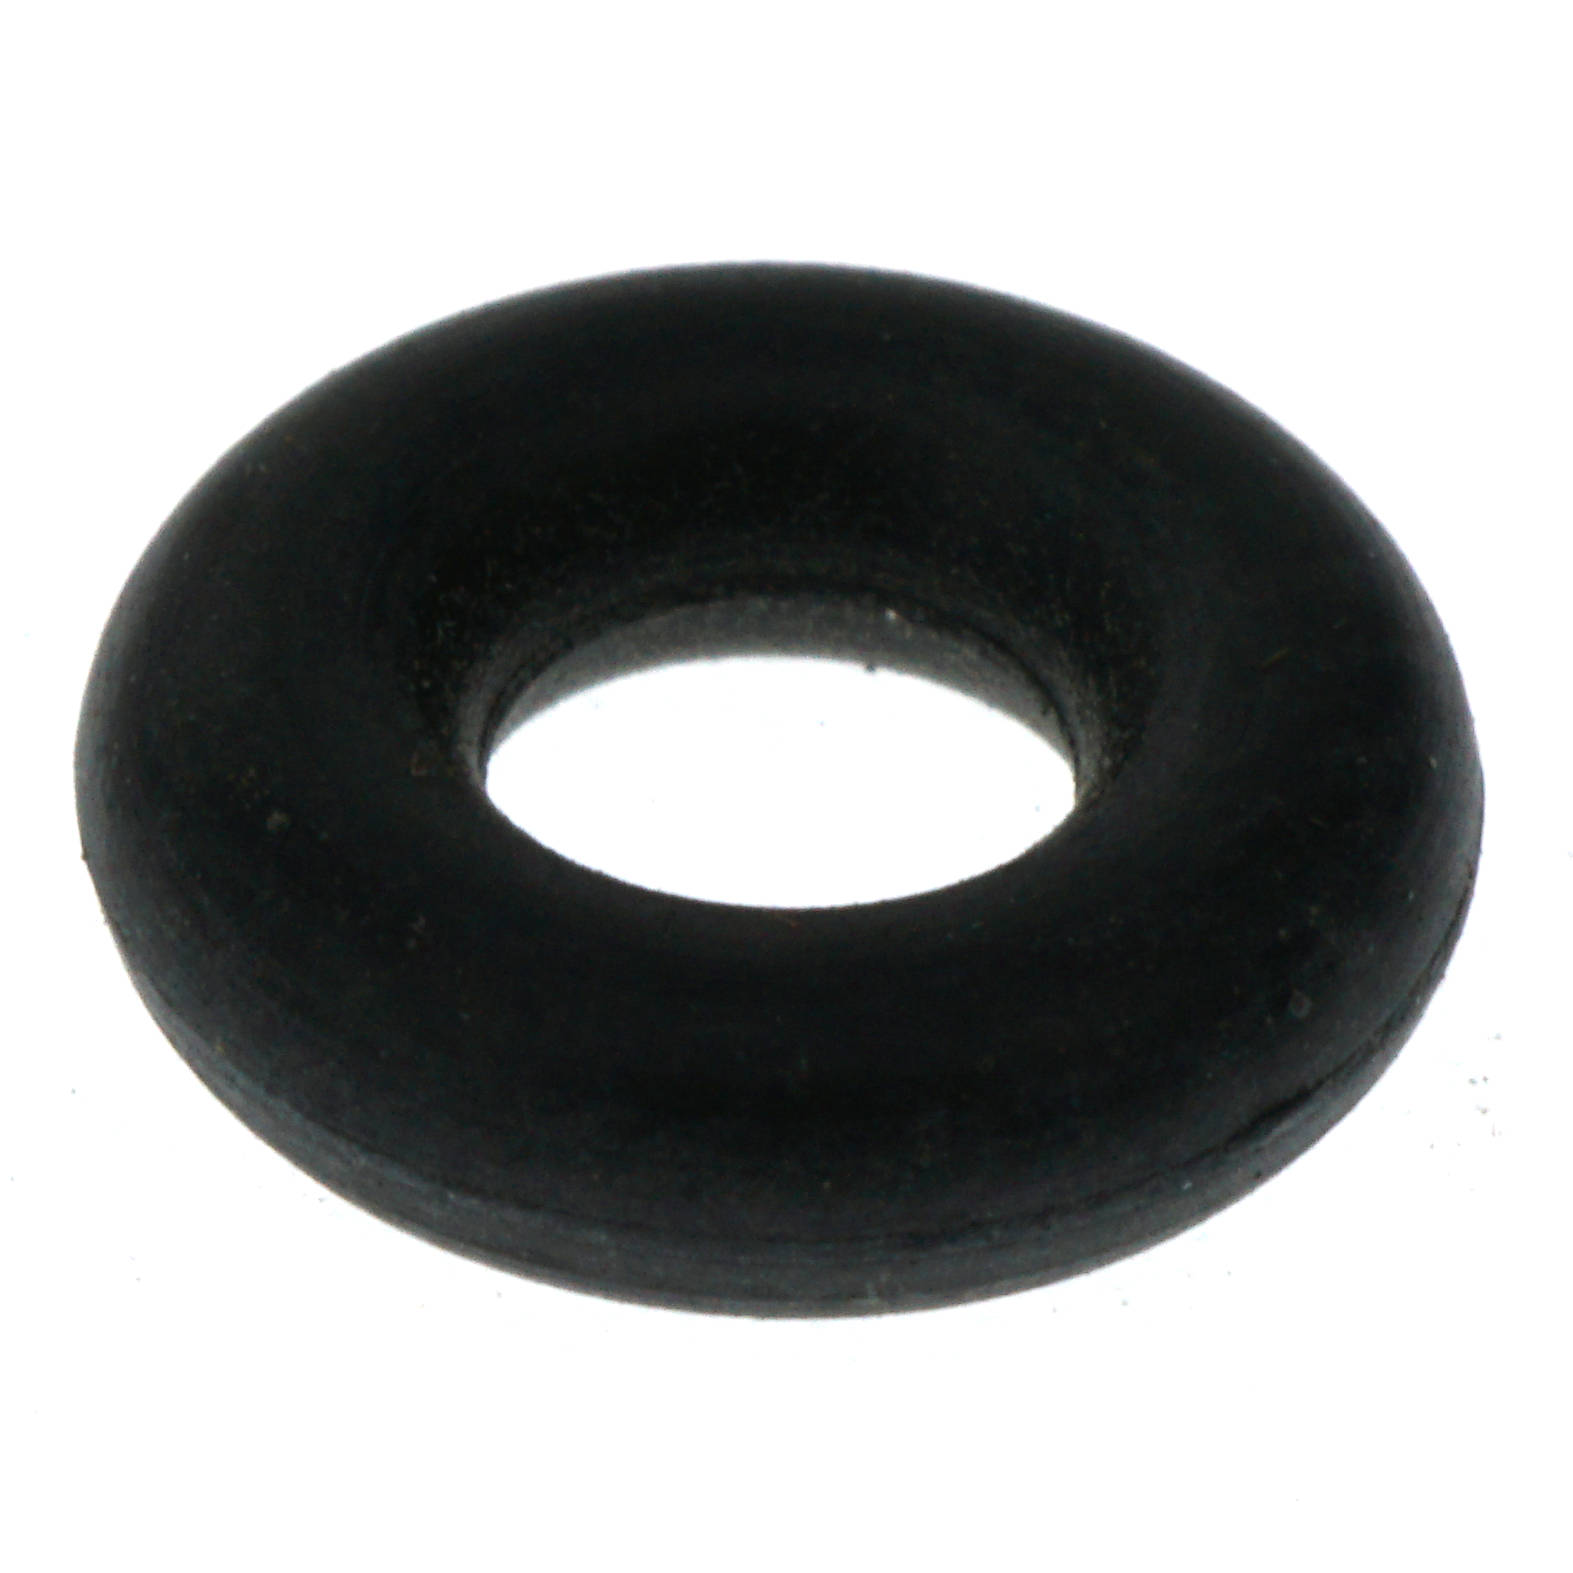 3mm ID x 7mm OD x 2mm CS 70A Duro Nitrile O-ring Bag of 5 